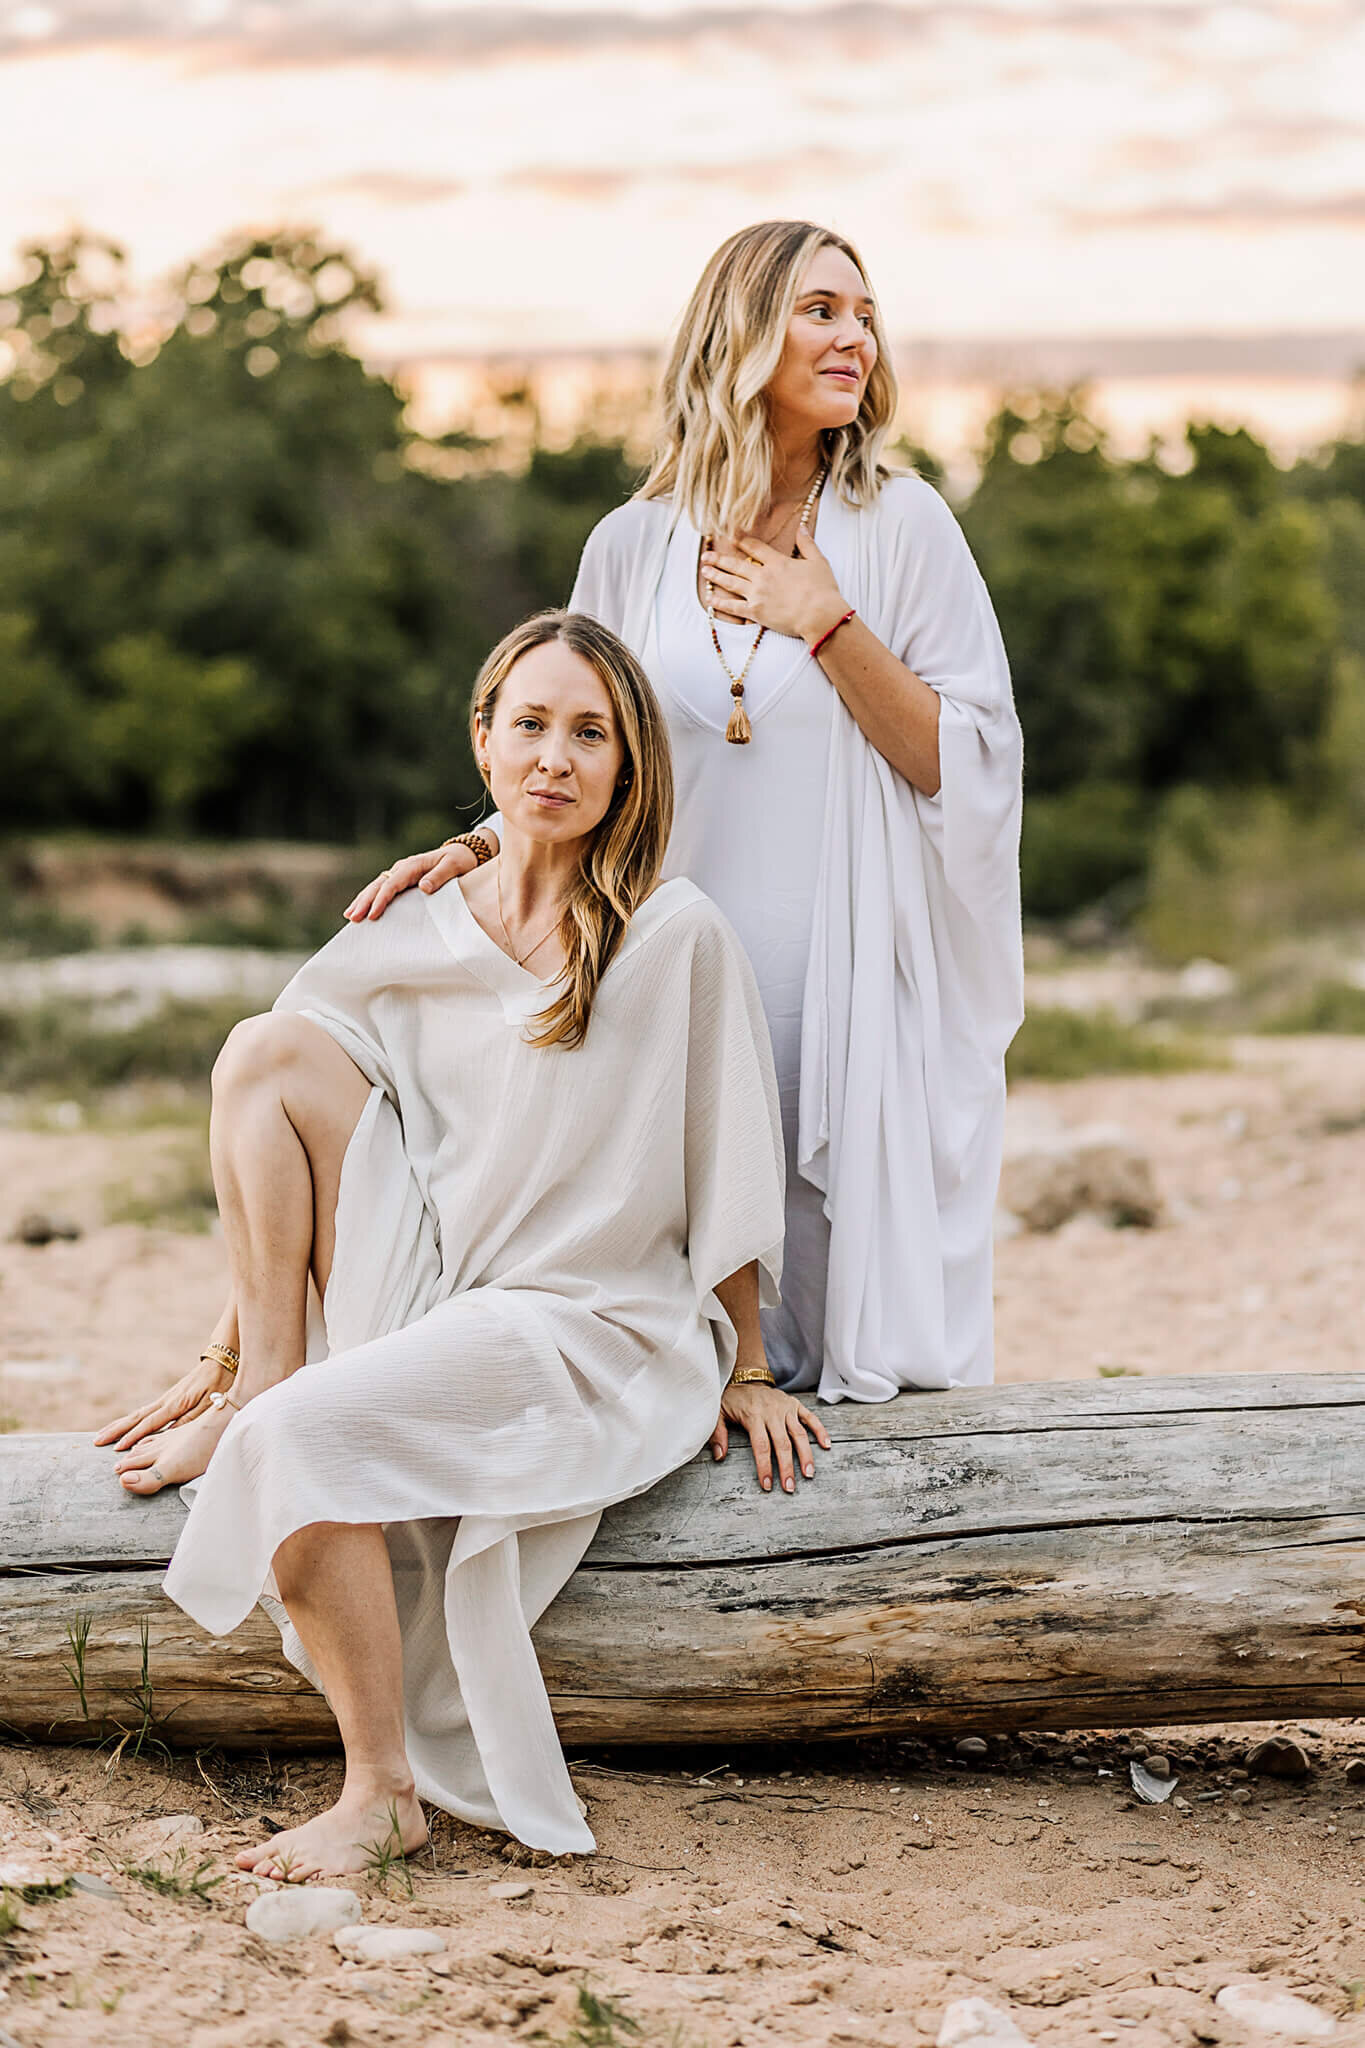 Peaceful photo of two women taken for their brand